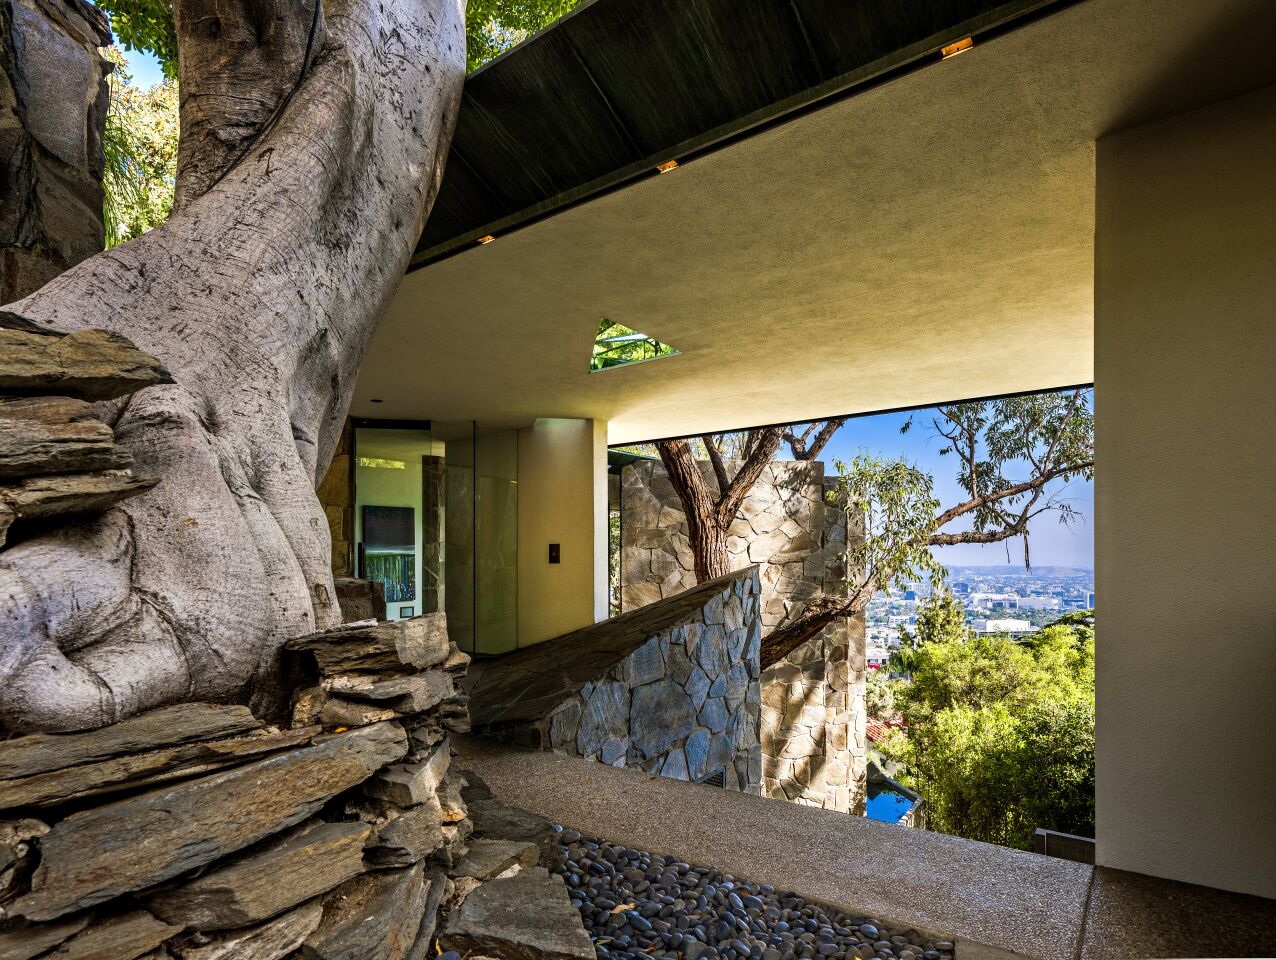 Next to the fireplace, a glass wall and thick stone blocks create an interior chamber for a mature eucalyptus tree.